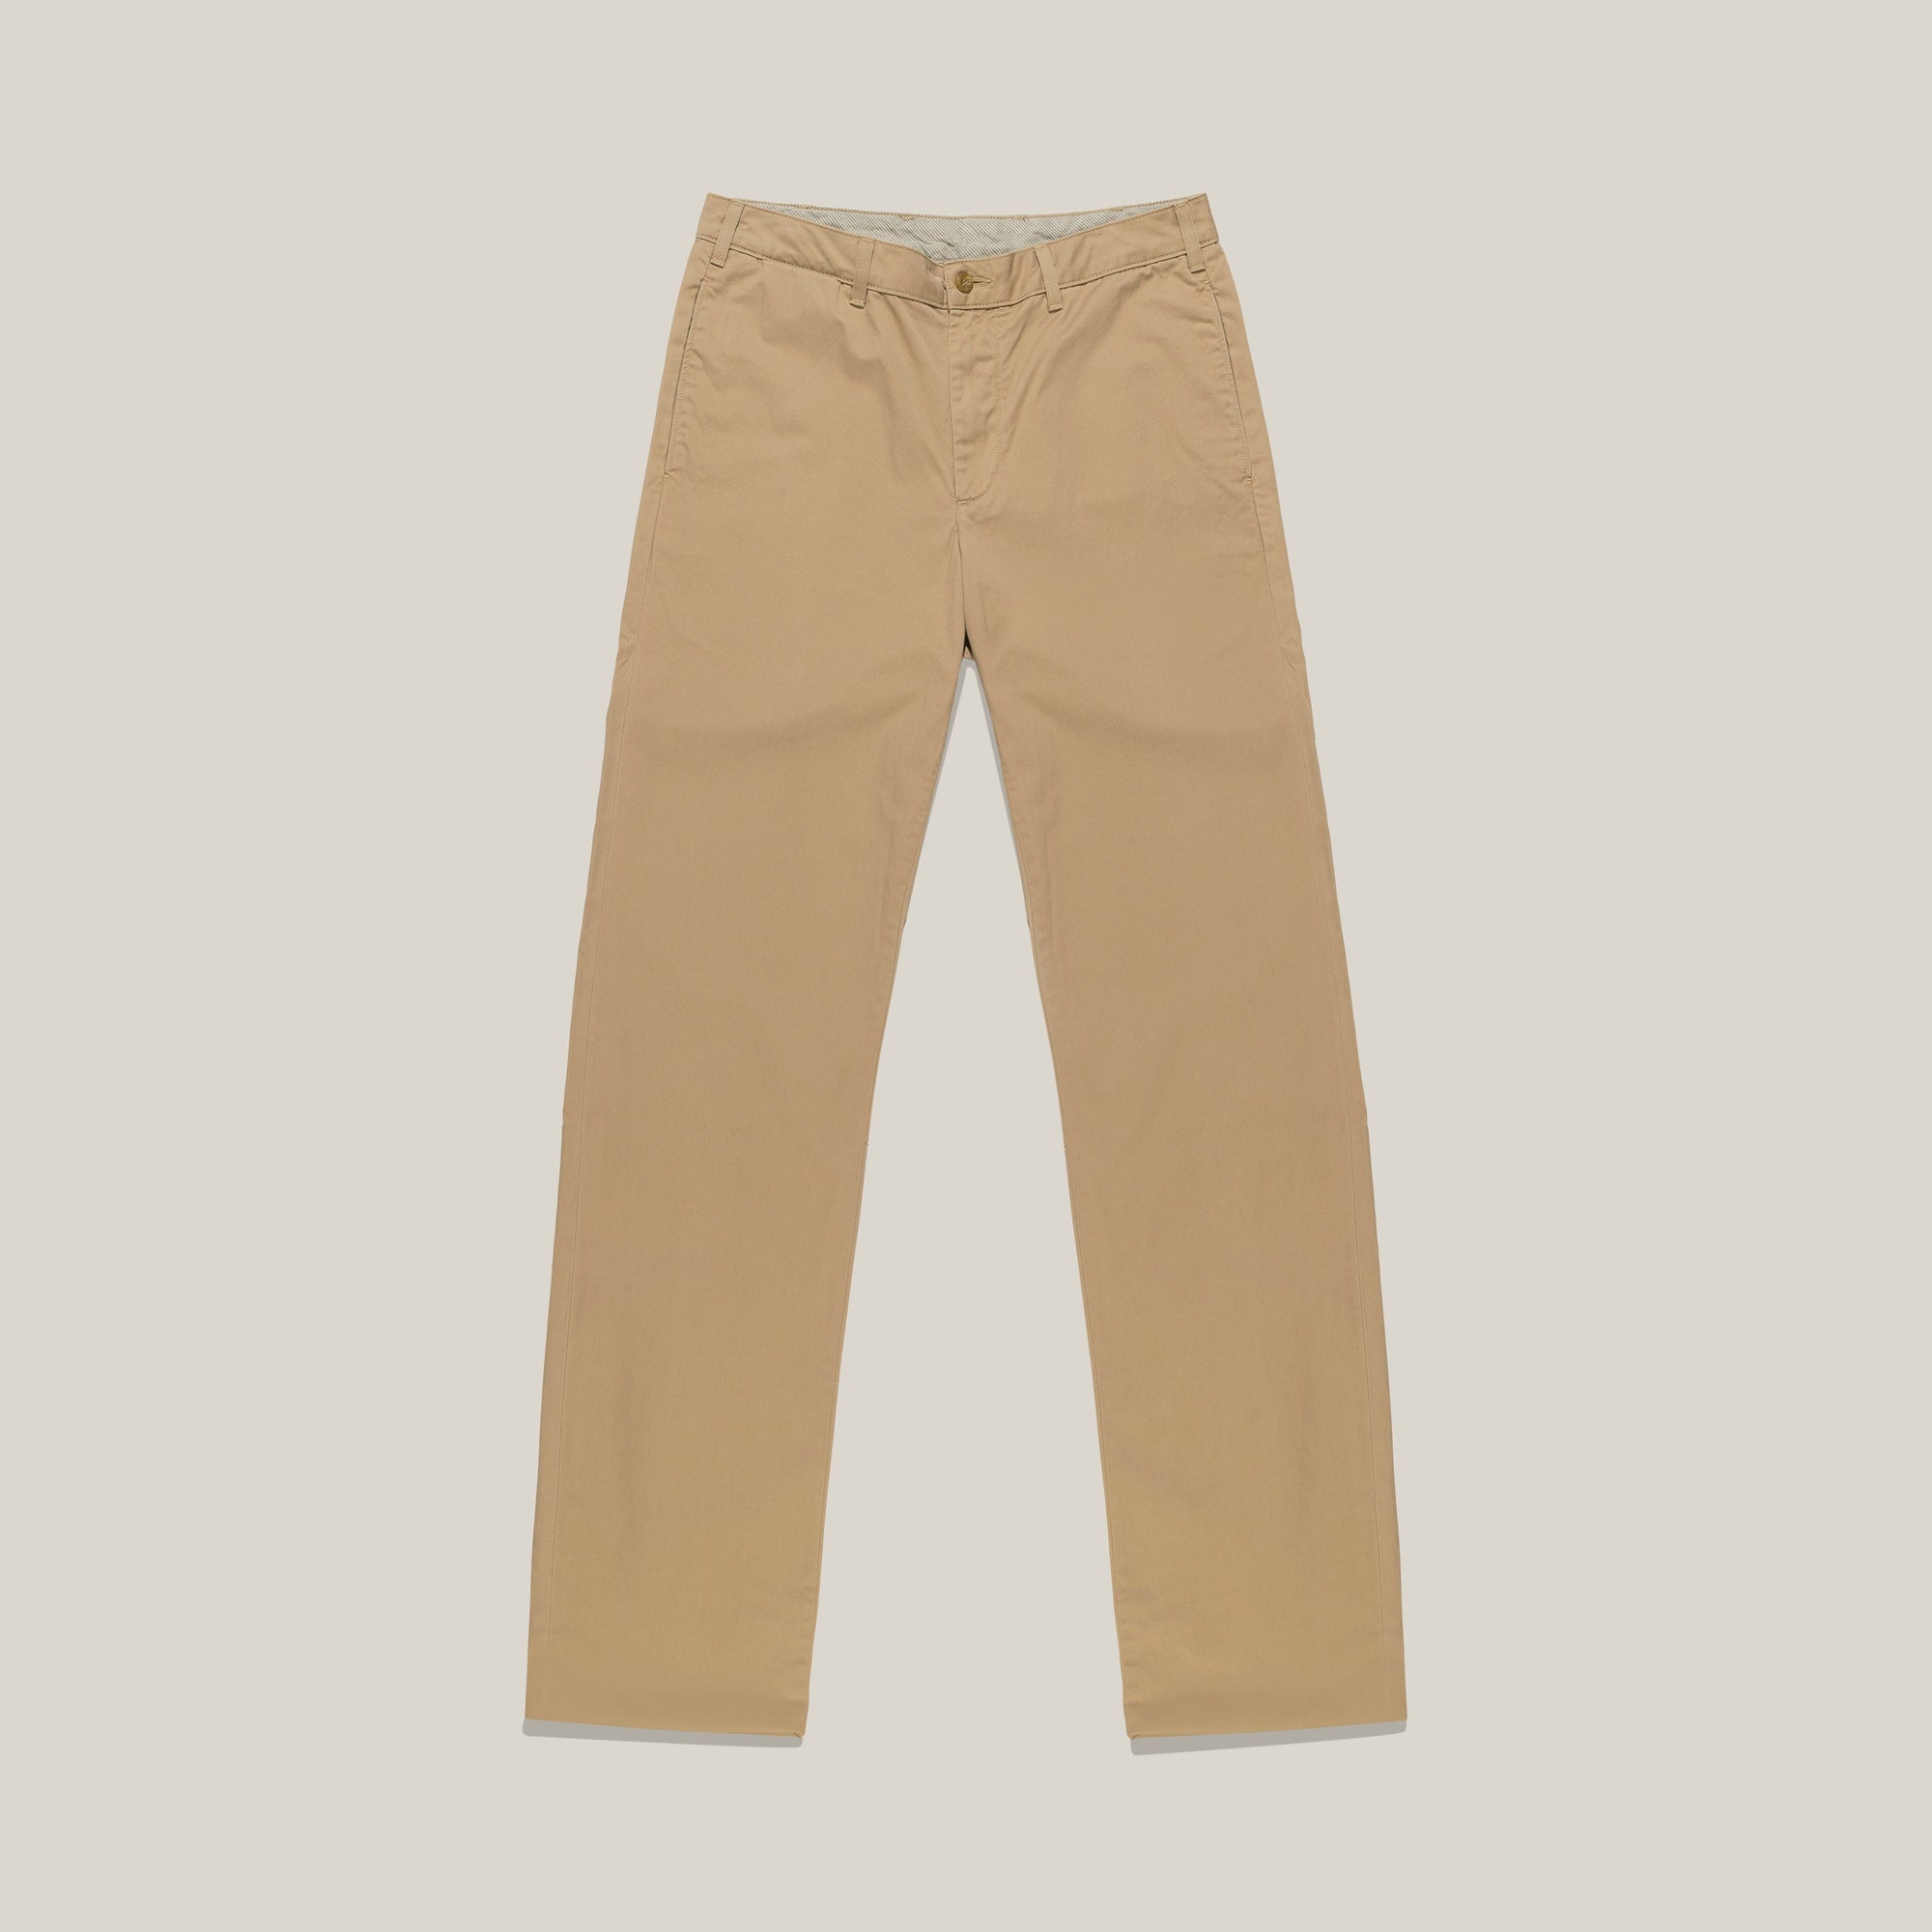 M2 Classic Fit Broken-In Chamois Twills in Camel by Bills Khakis